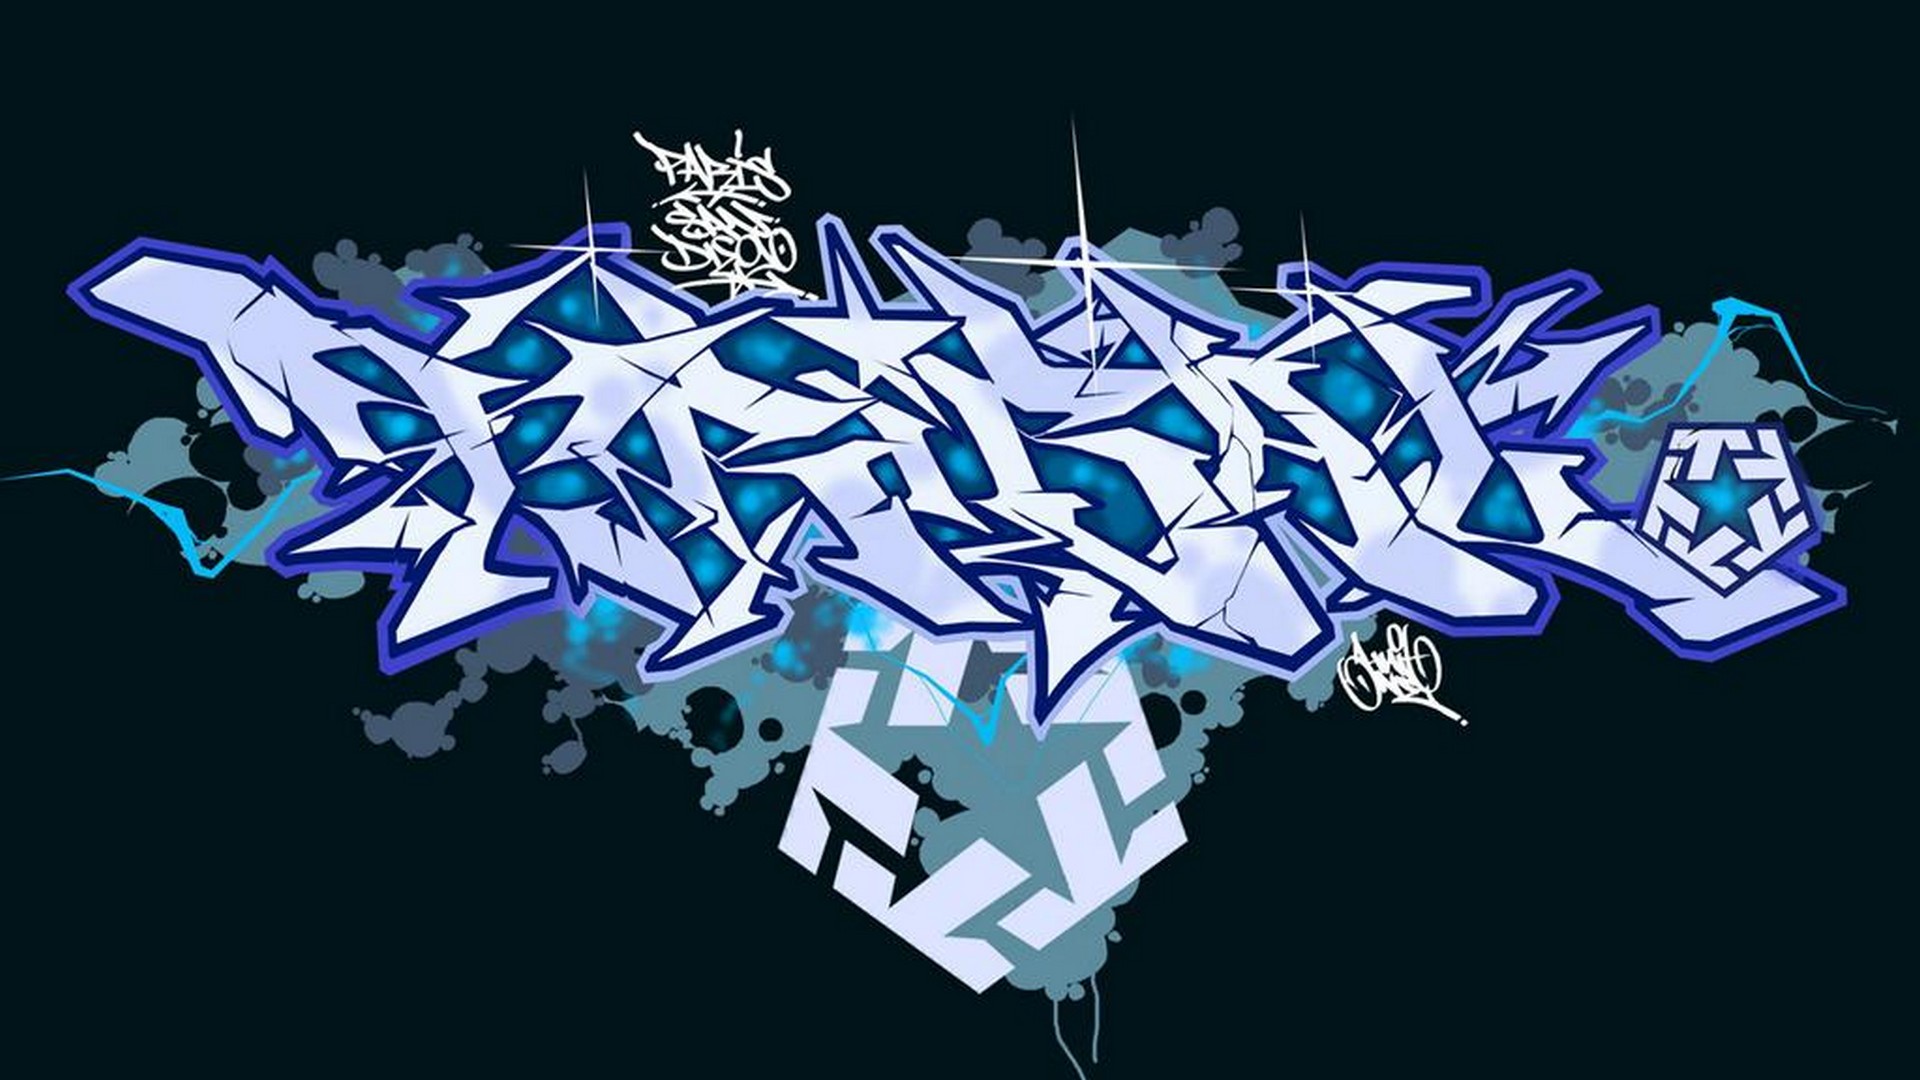 Computer Wallpapers Graffiti Letters with image resolution 1920x1080 pixel. You can use this wallpaper as background for your desktop Computer Screensavers, Android or iPhone smartphones